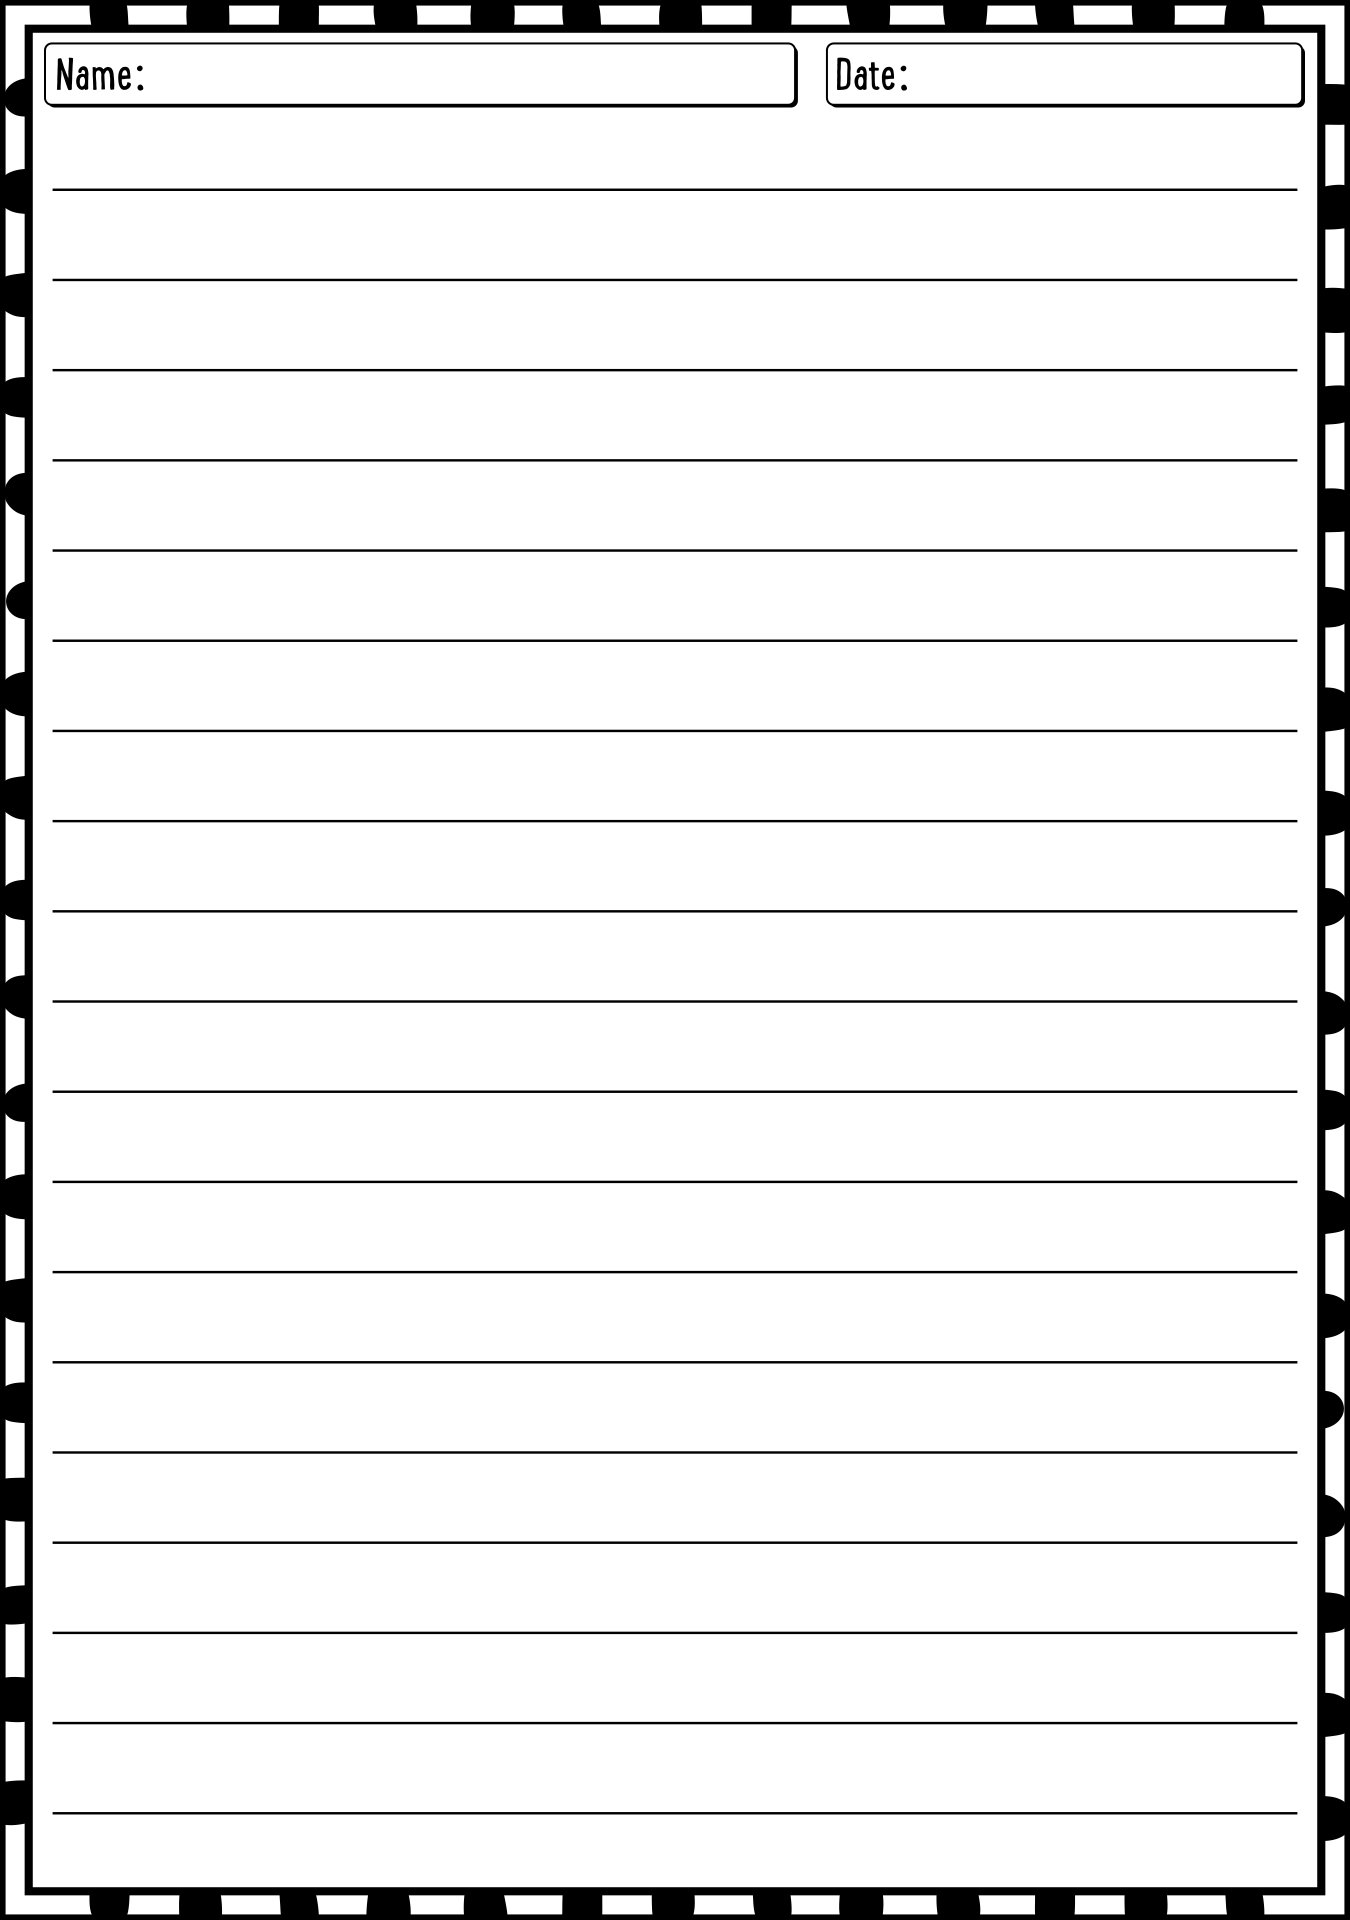 15 Best Images of Long Lined Paper Worksheets 4th Grade EssayWriting